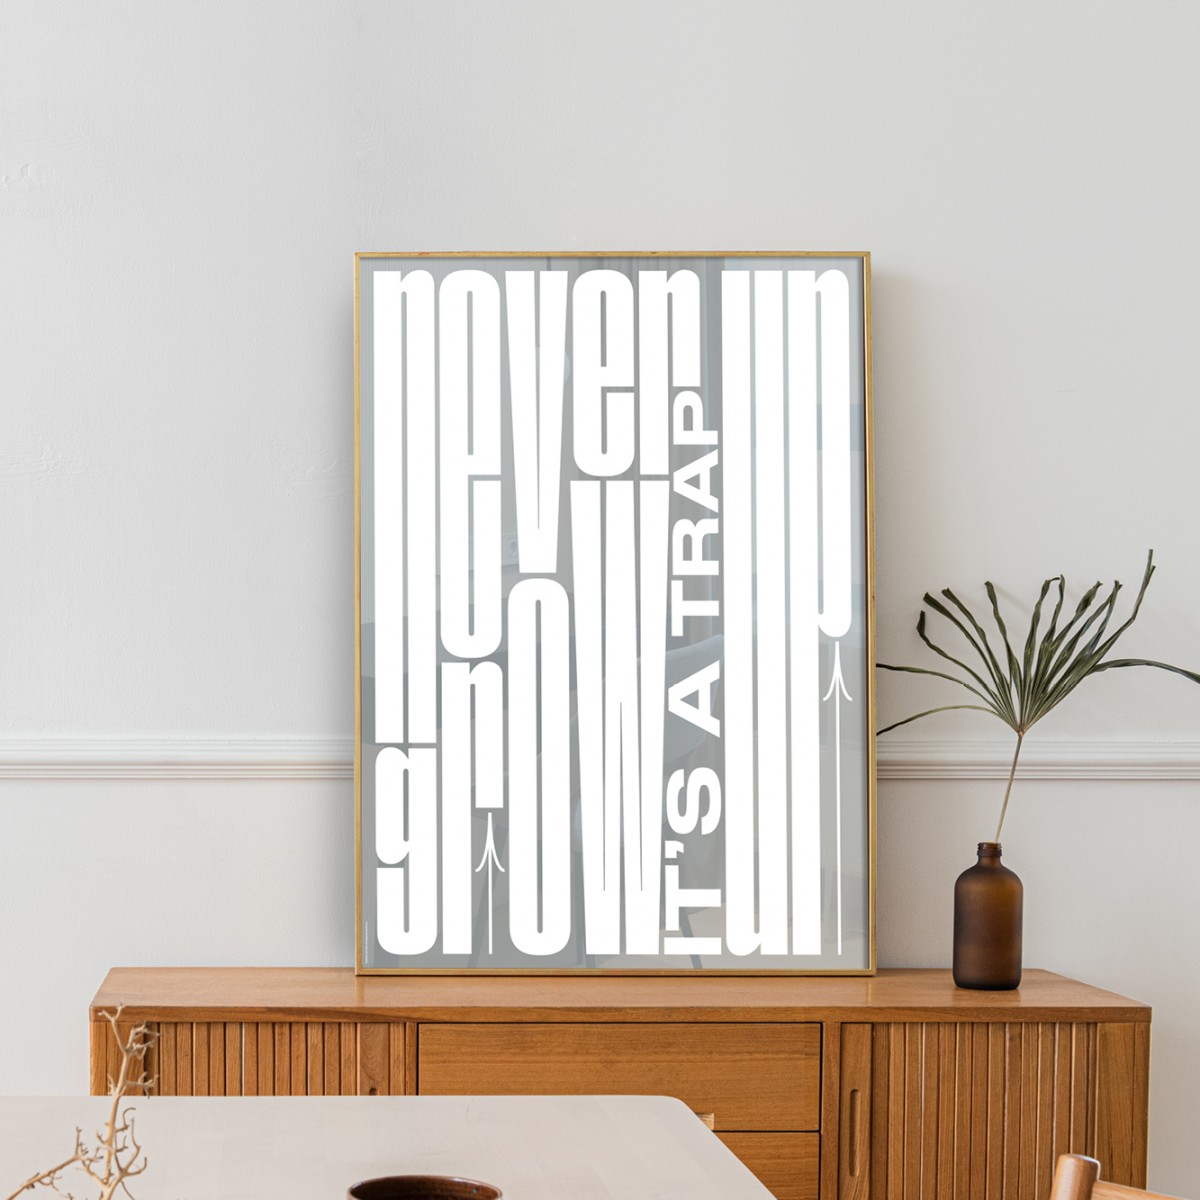 NEW PRINTS ON THE BLOCK / Plakat »Never grow up«